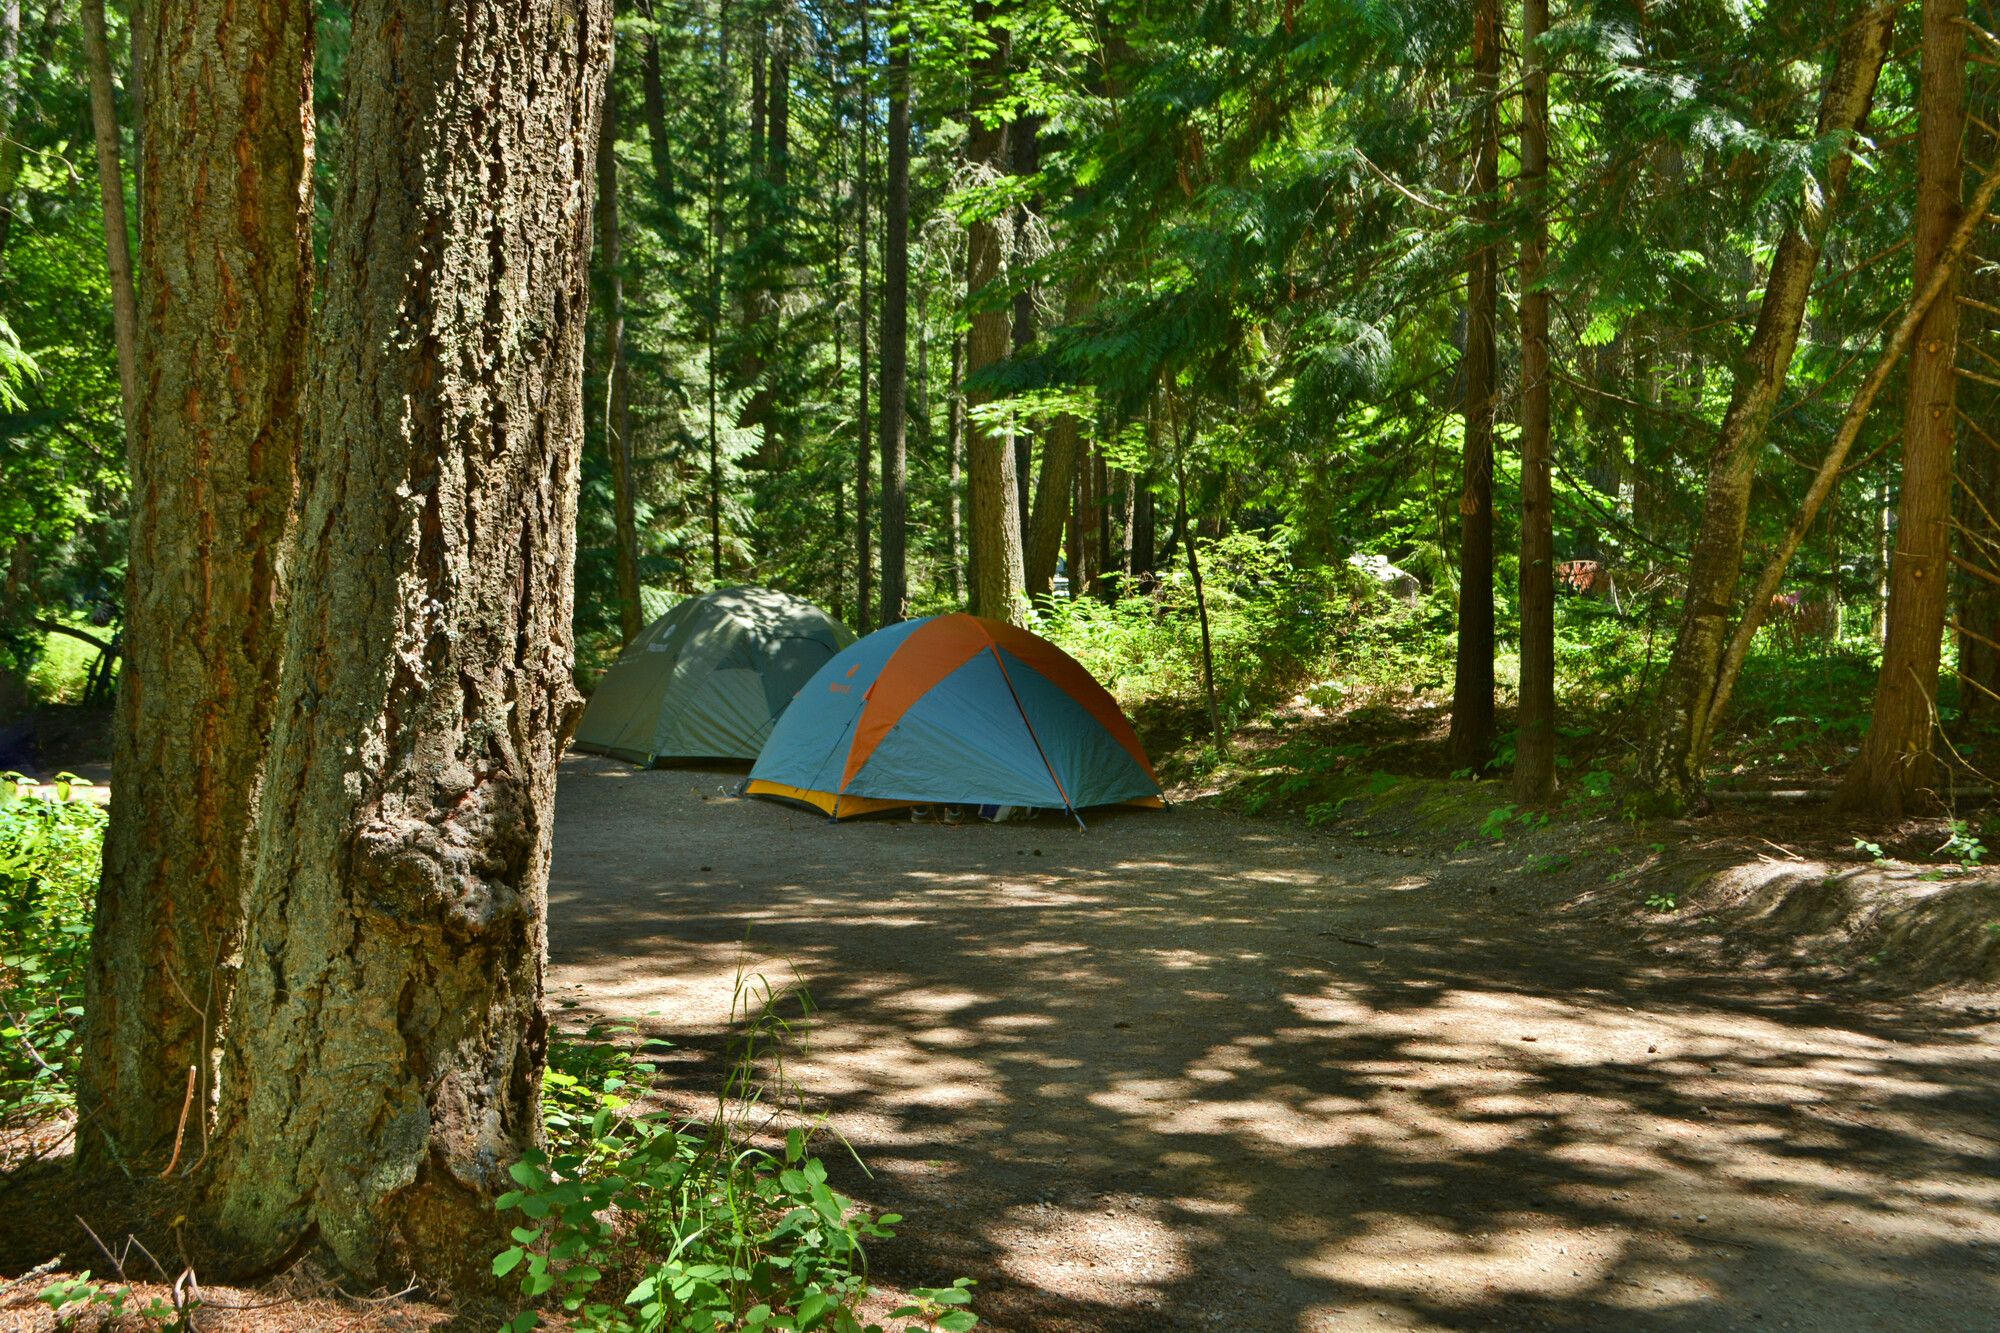 Tents in a campsite in Shuswap Lake Park.